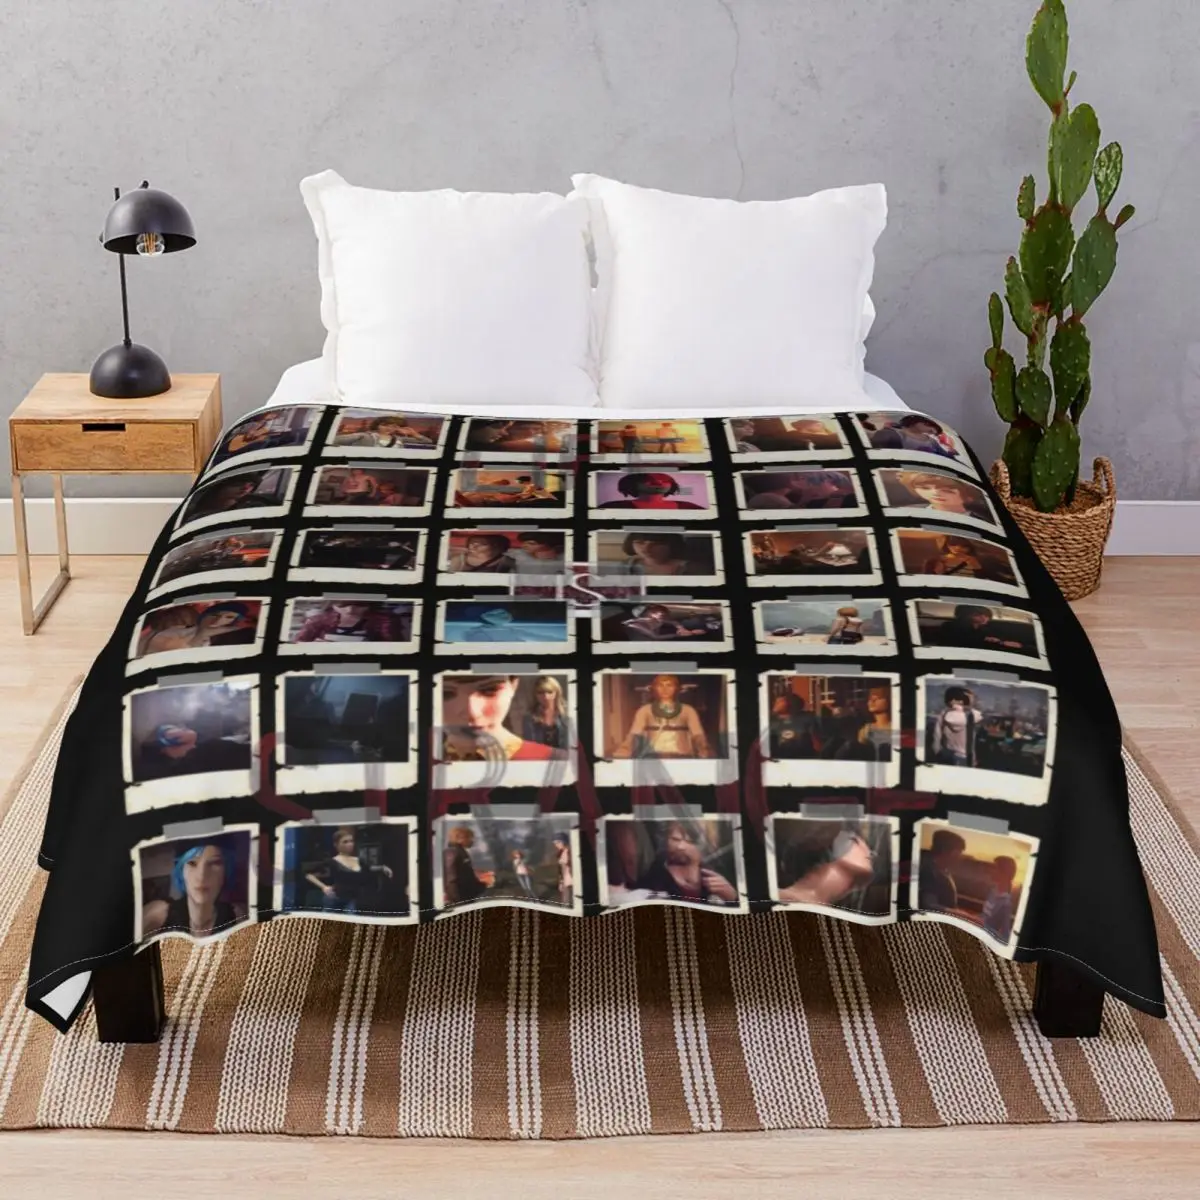 Wall Of Pictures Blanket Fleece Printed Super Warm Throw Blankets for Bedding Sofa Travel Office